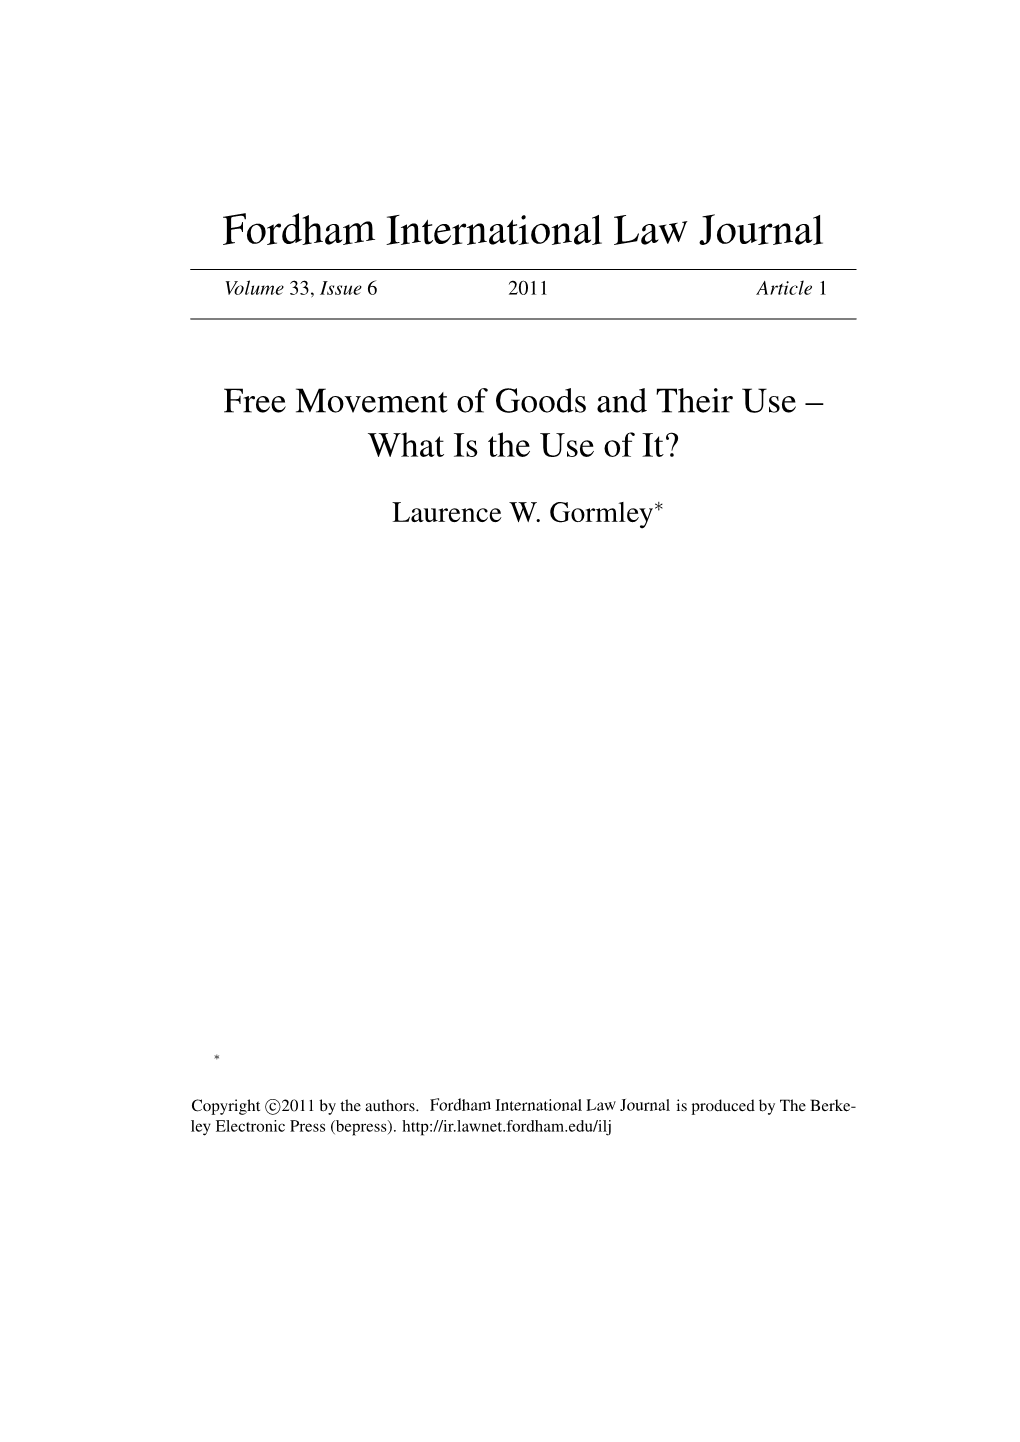 Free Movement of Goods and Their Use -- What Is the Use Of